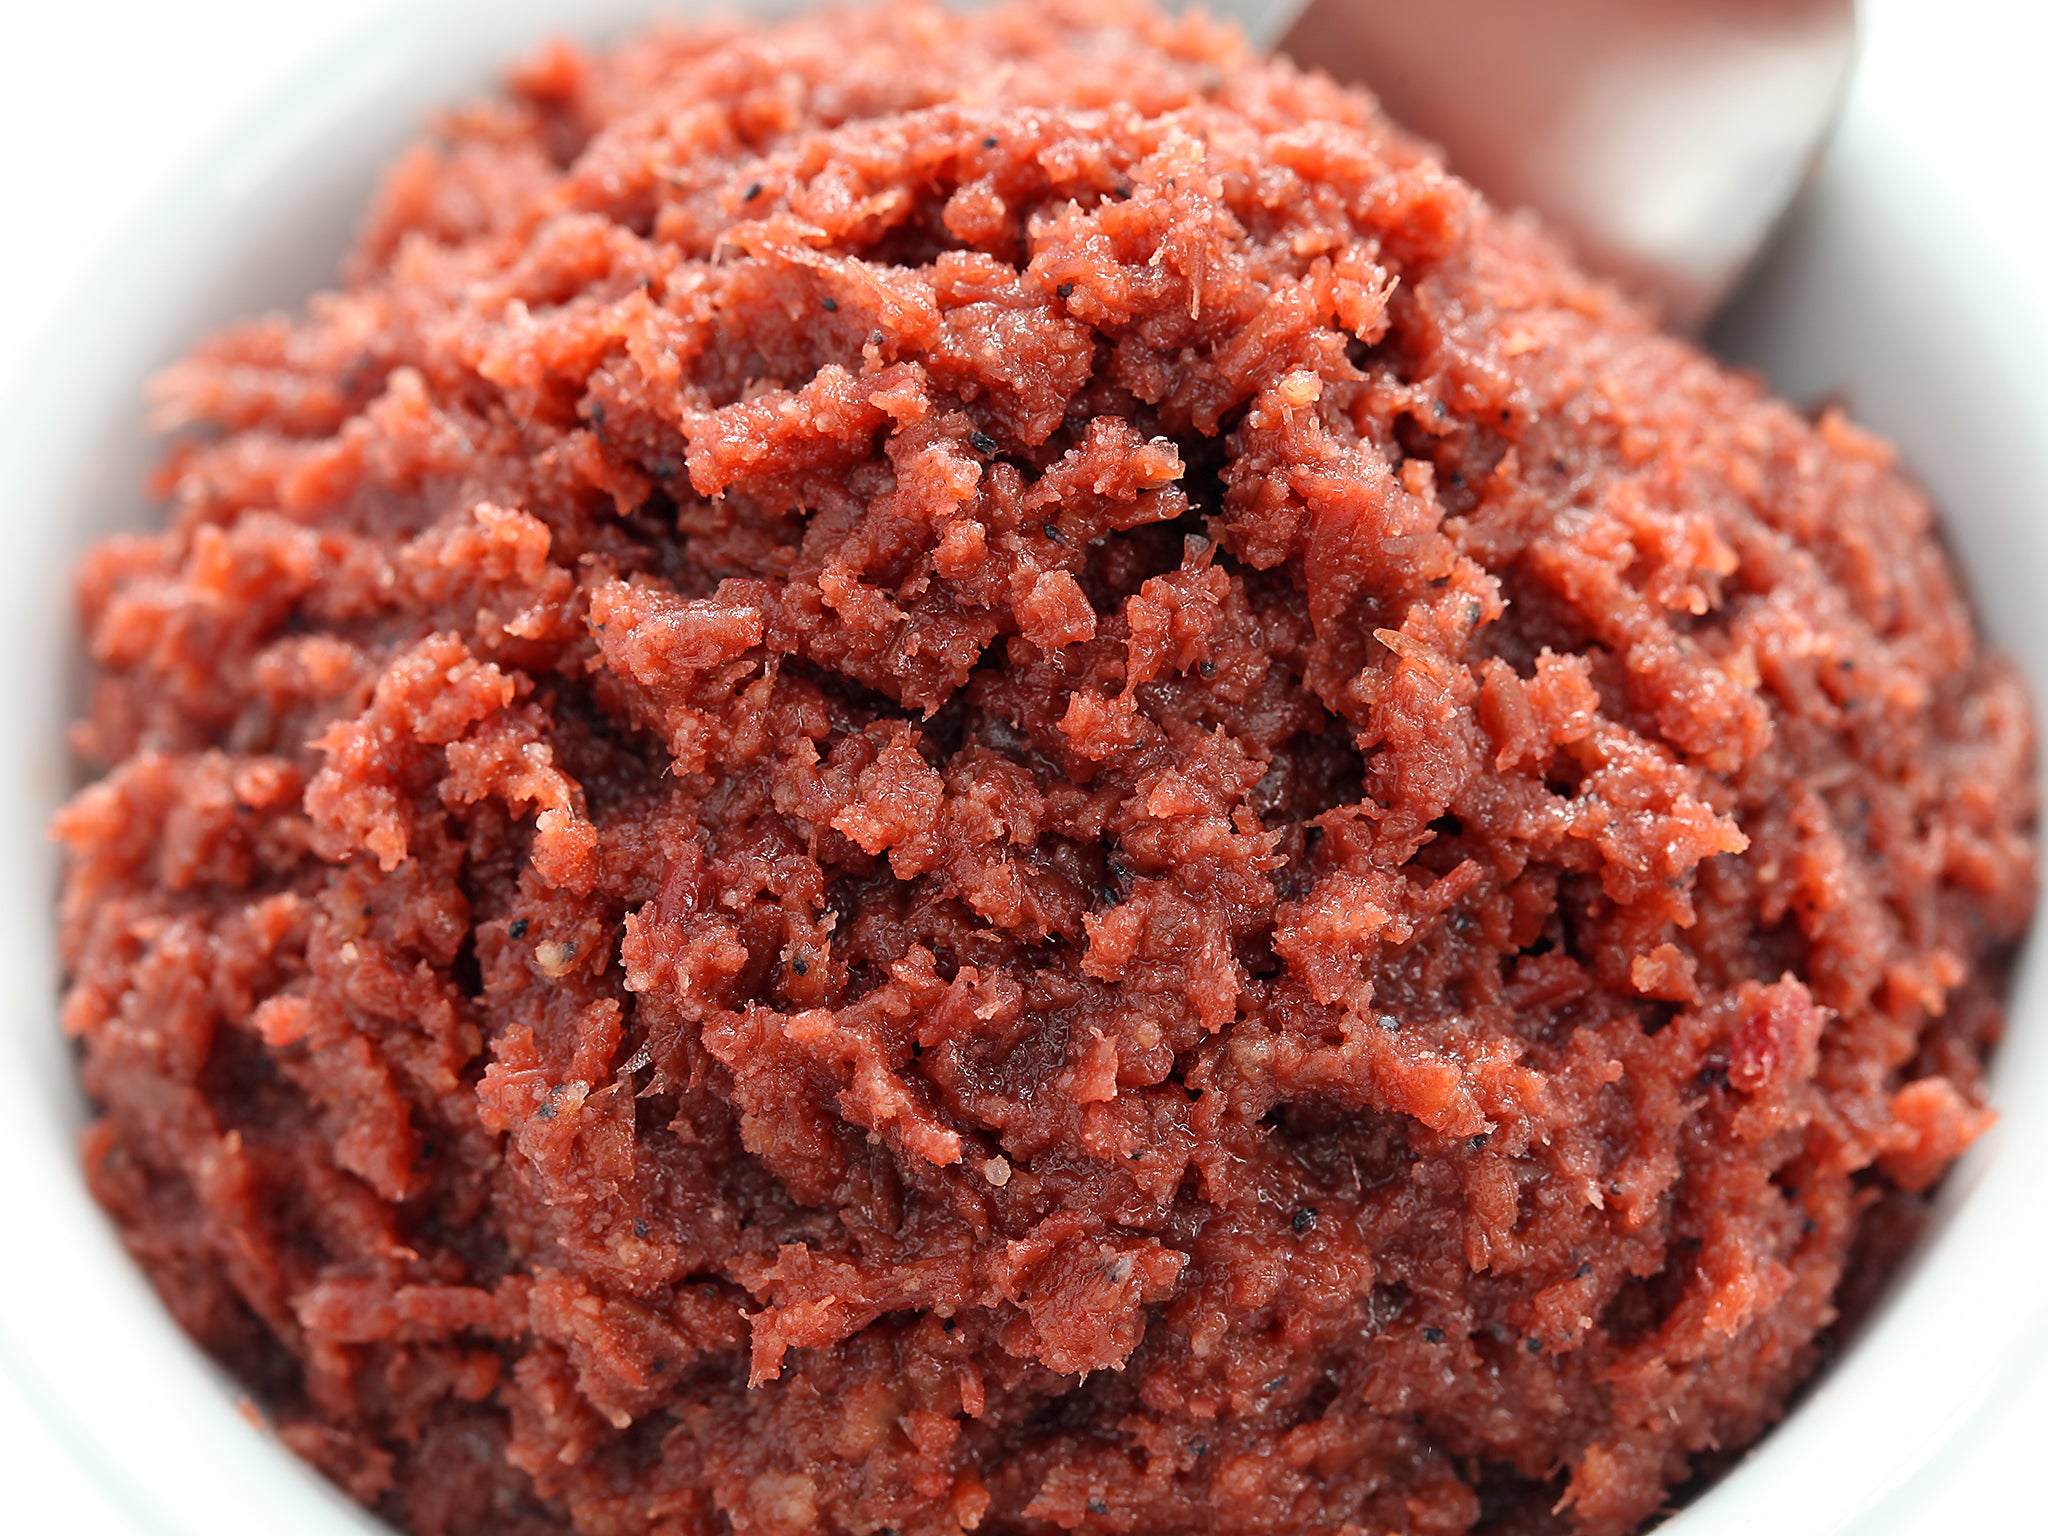 bagoong alamang is a Philippine fermented condiment made of krill